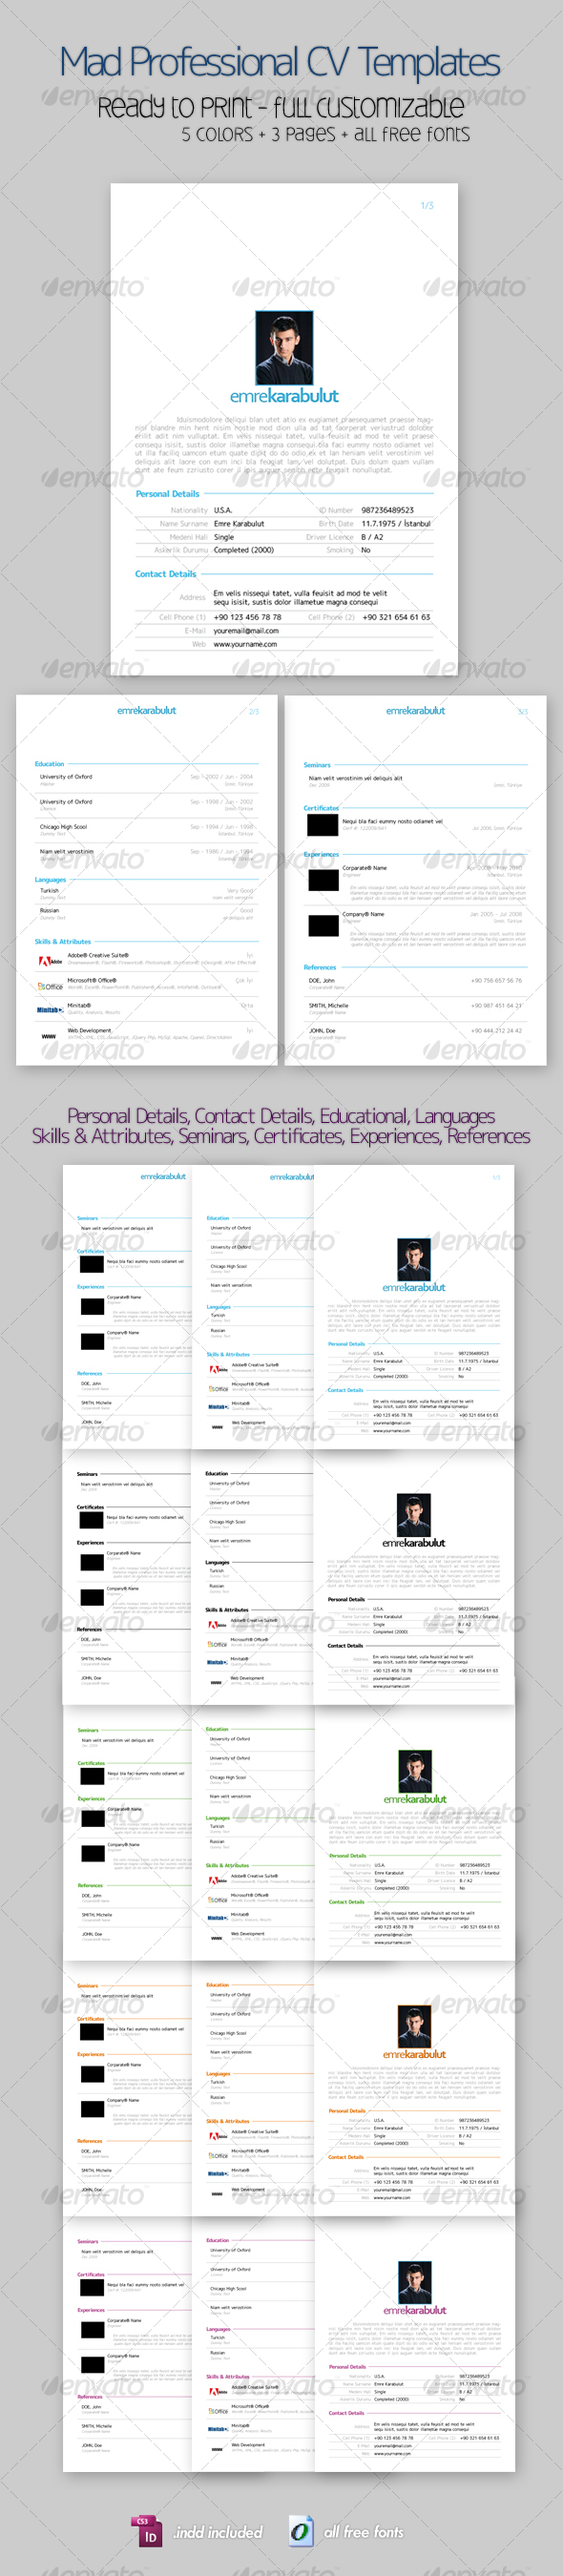 Mad Professional Cv Template with 5 Color, 3 Pages